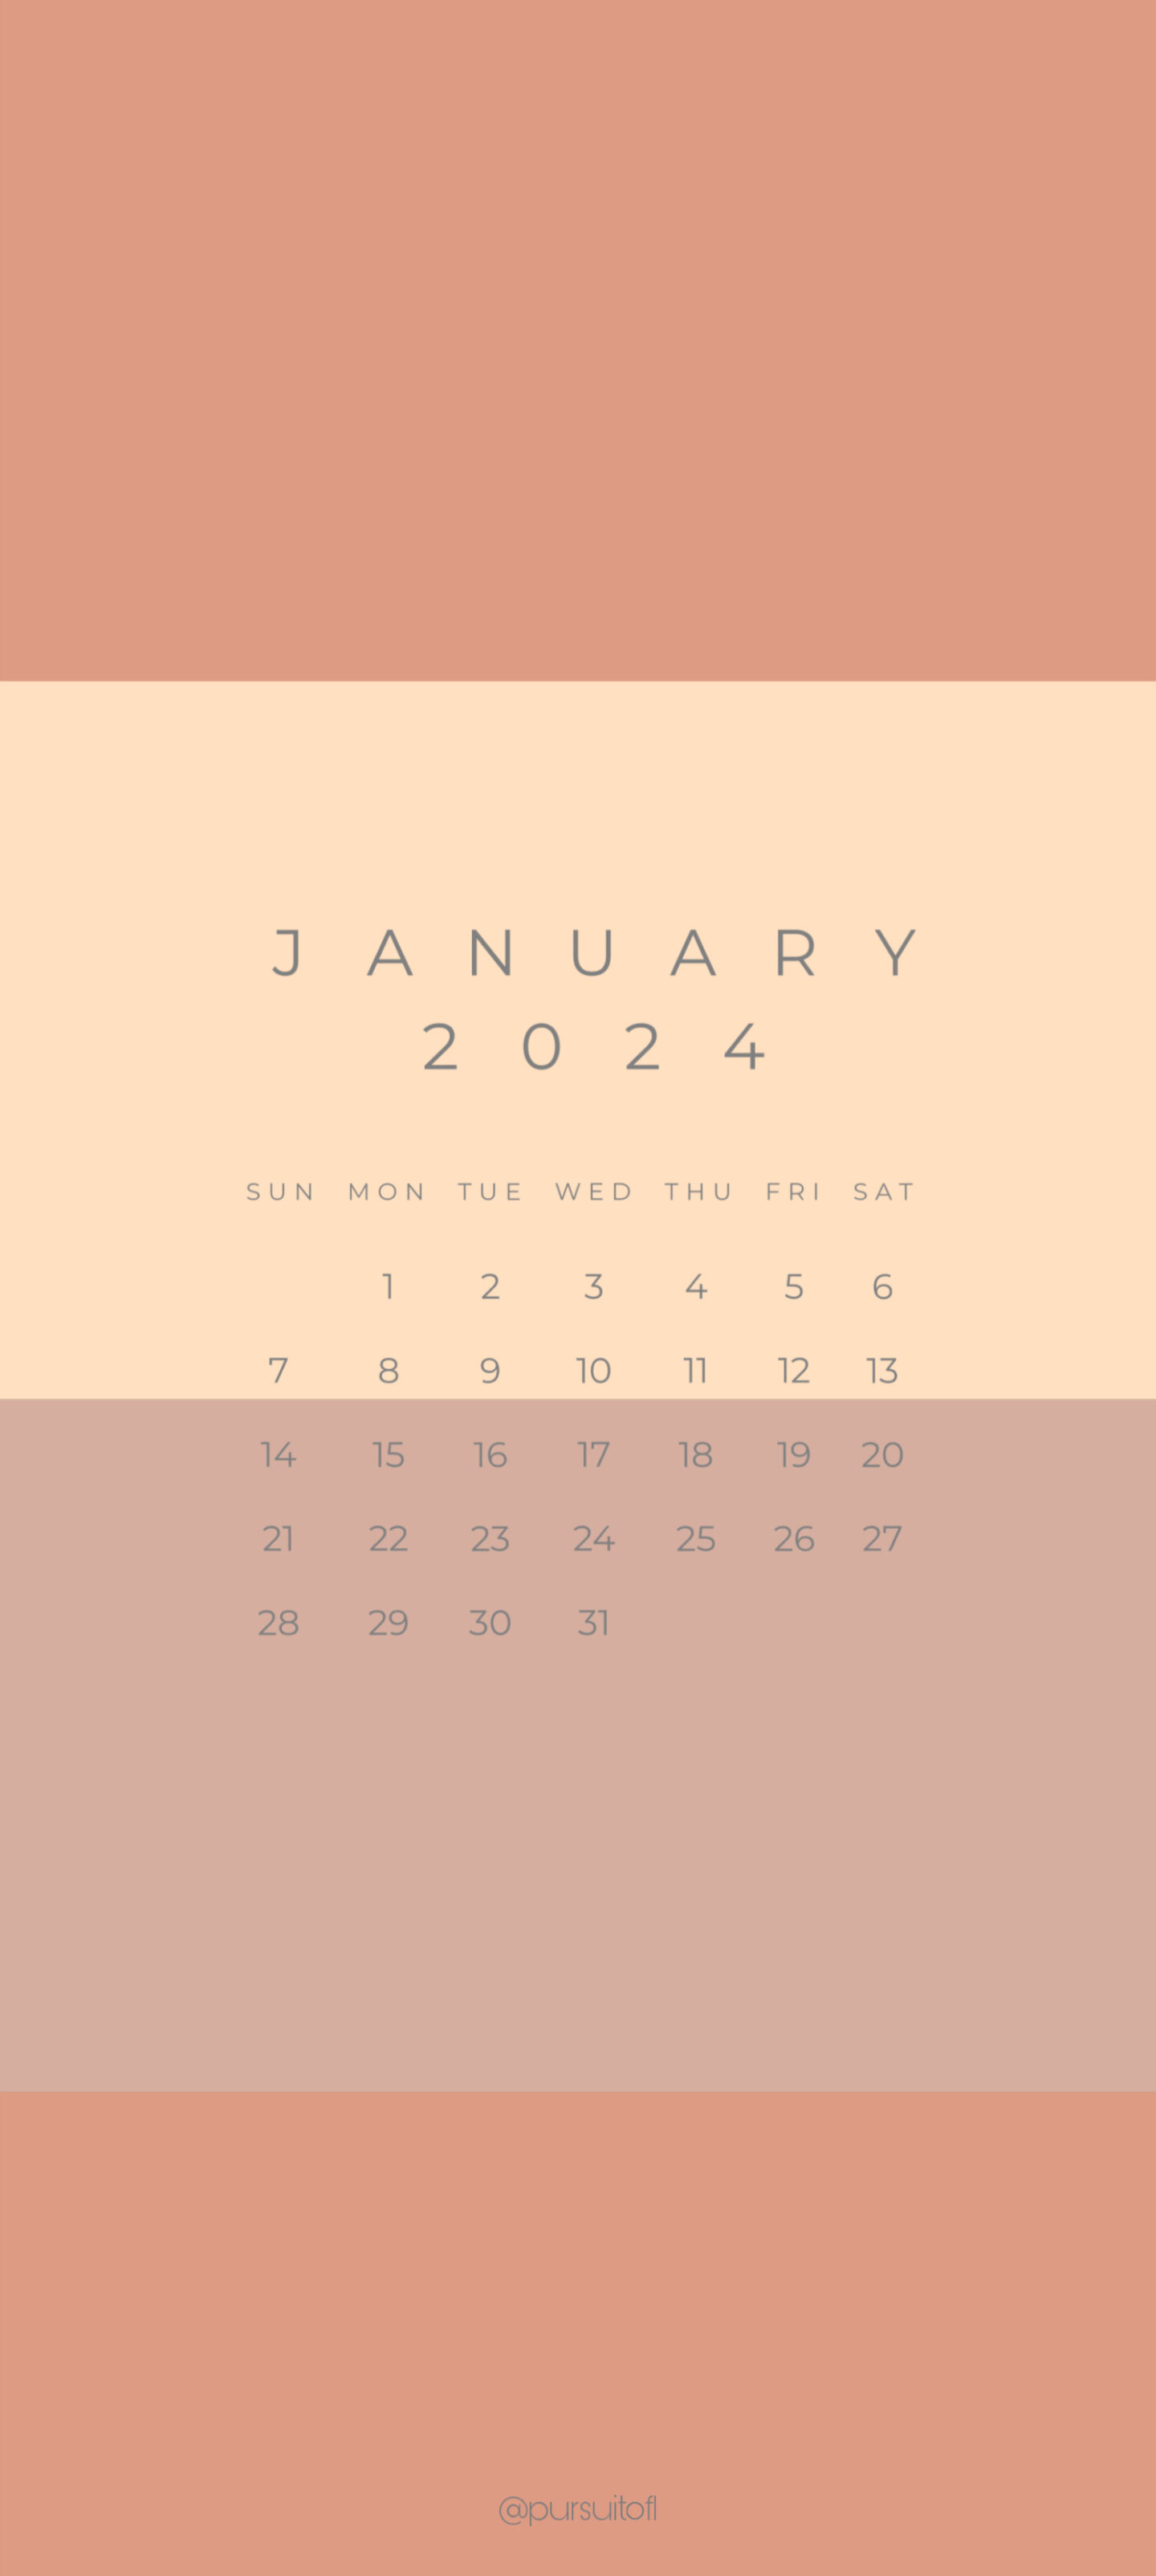 Neutral Color Block Phone Wallpaper with January 2024 Calendar